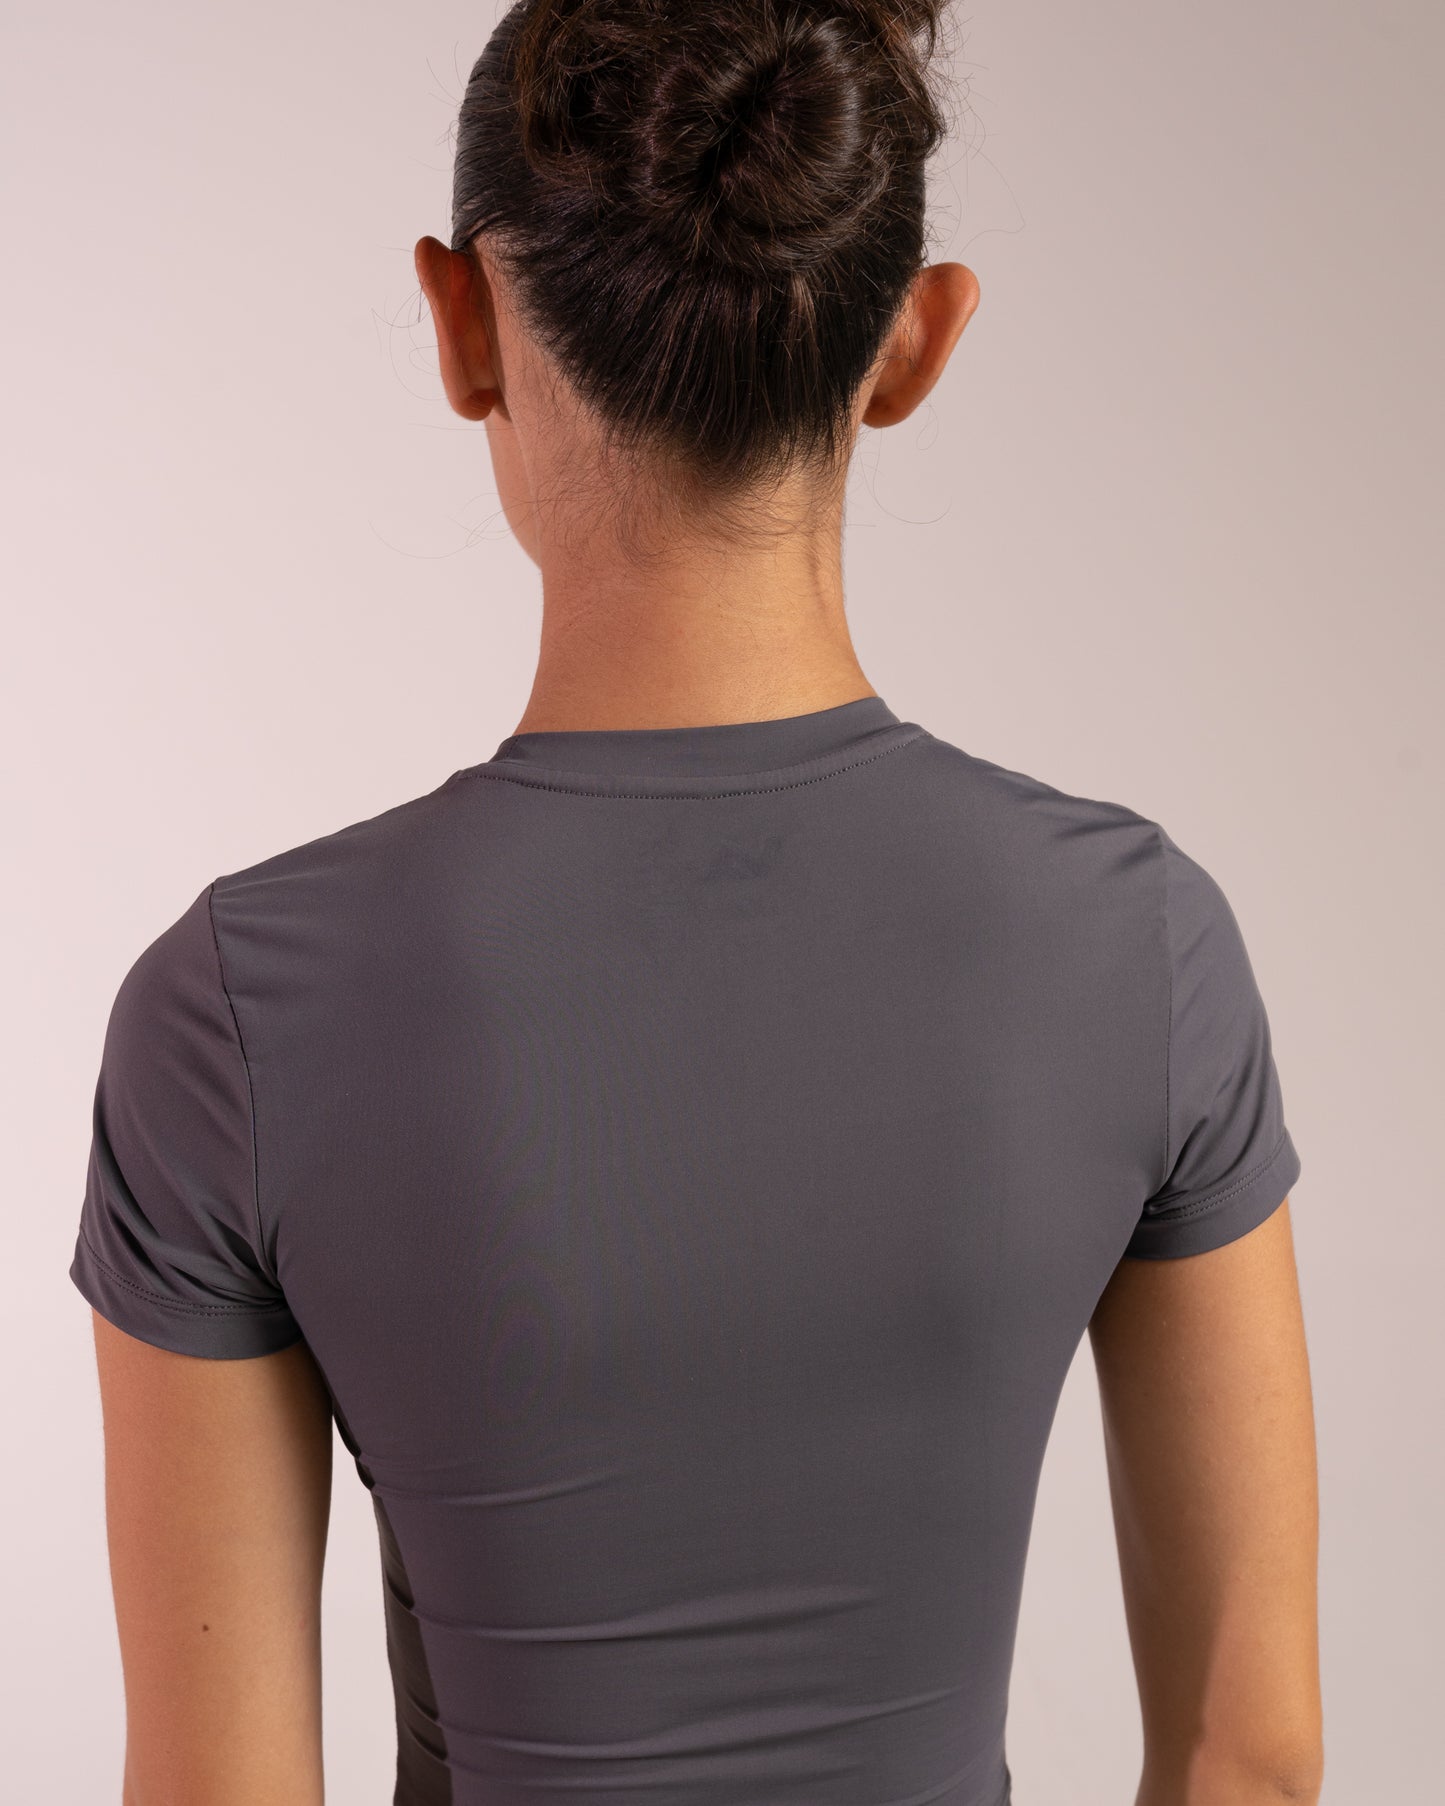 Second Skin T-shirt  - Charcoal